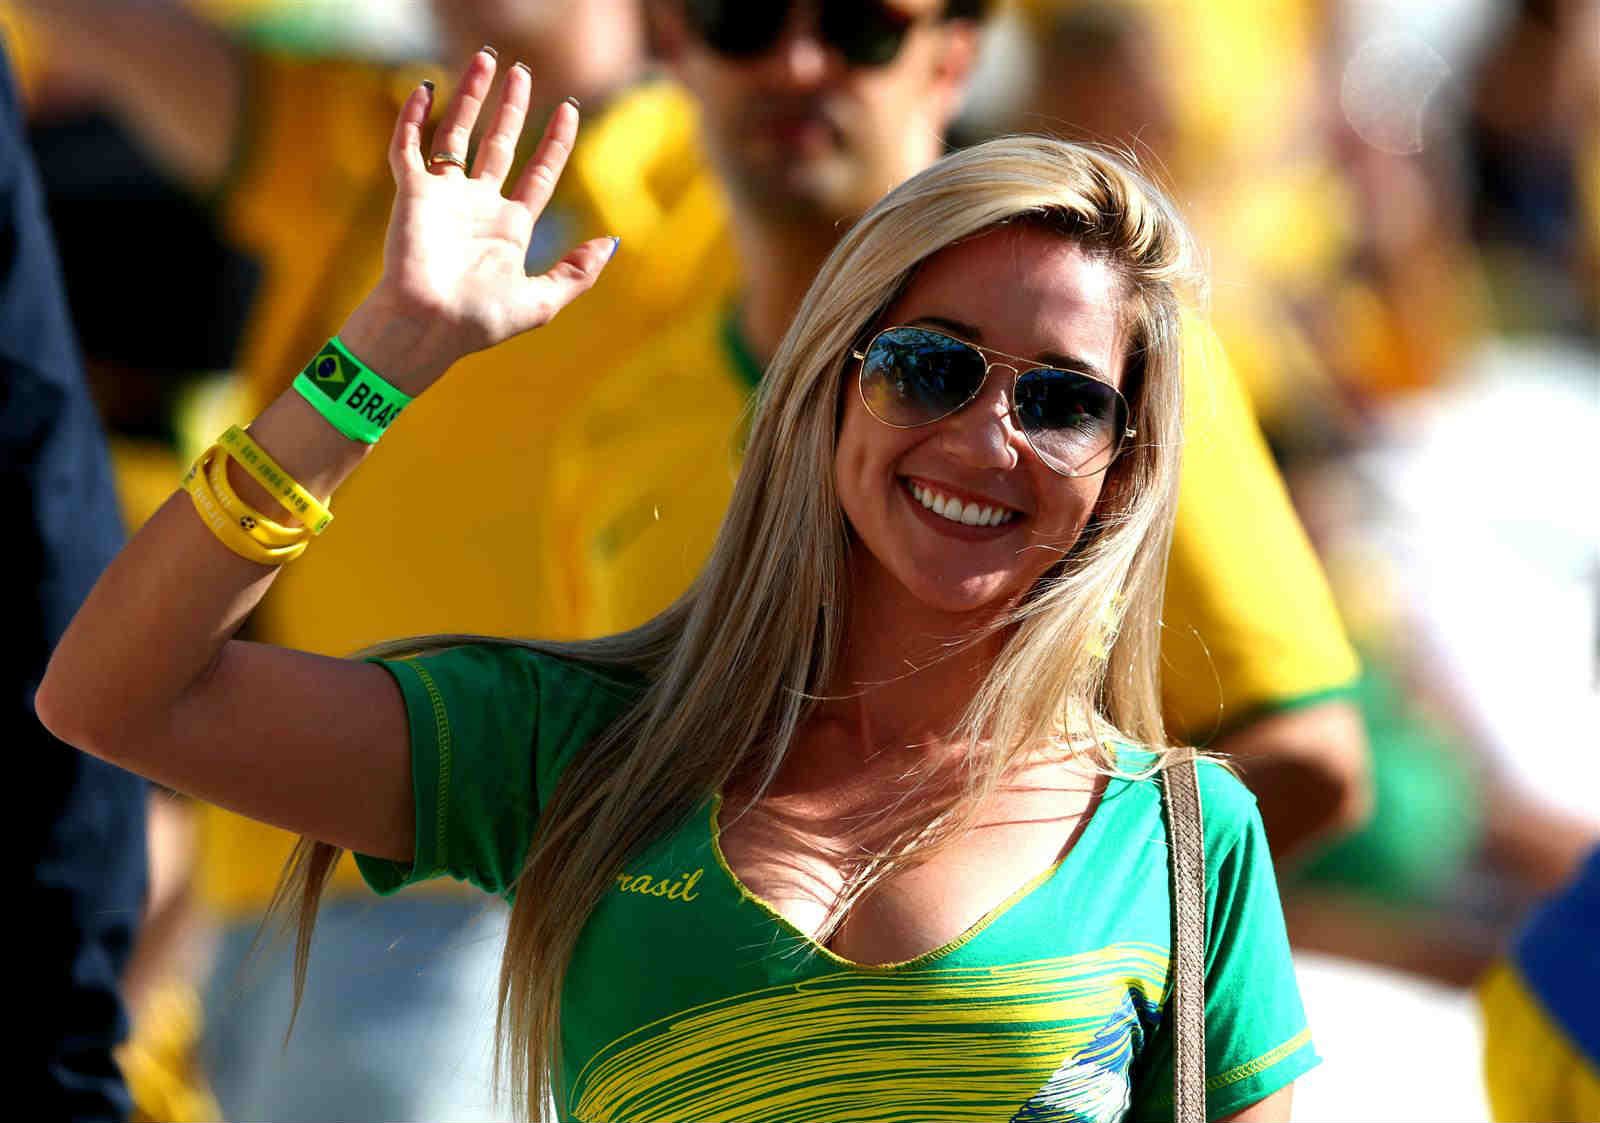 Brazil is one of the World Cup teams with the hottest football fans